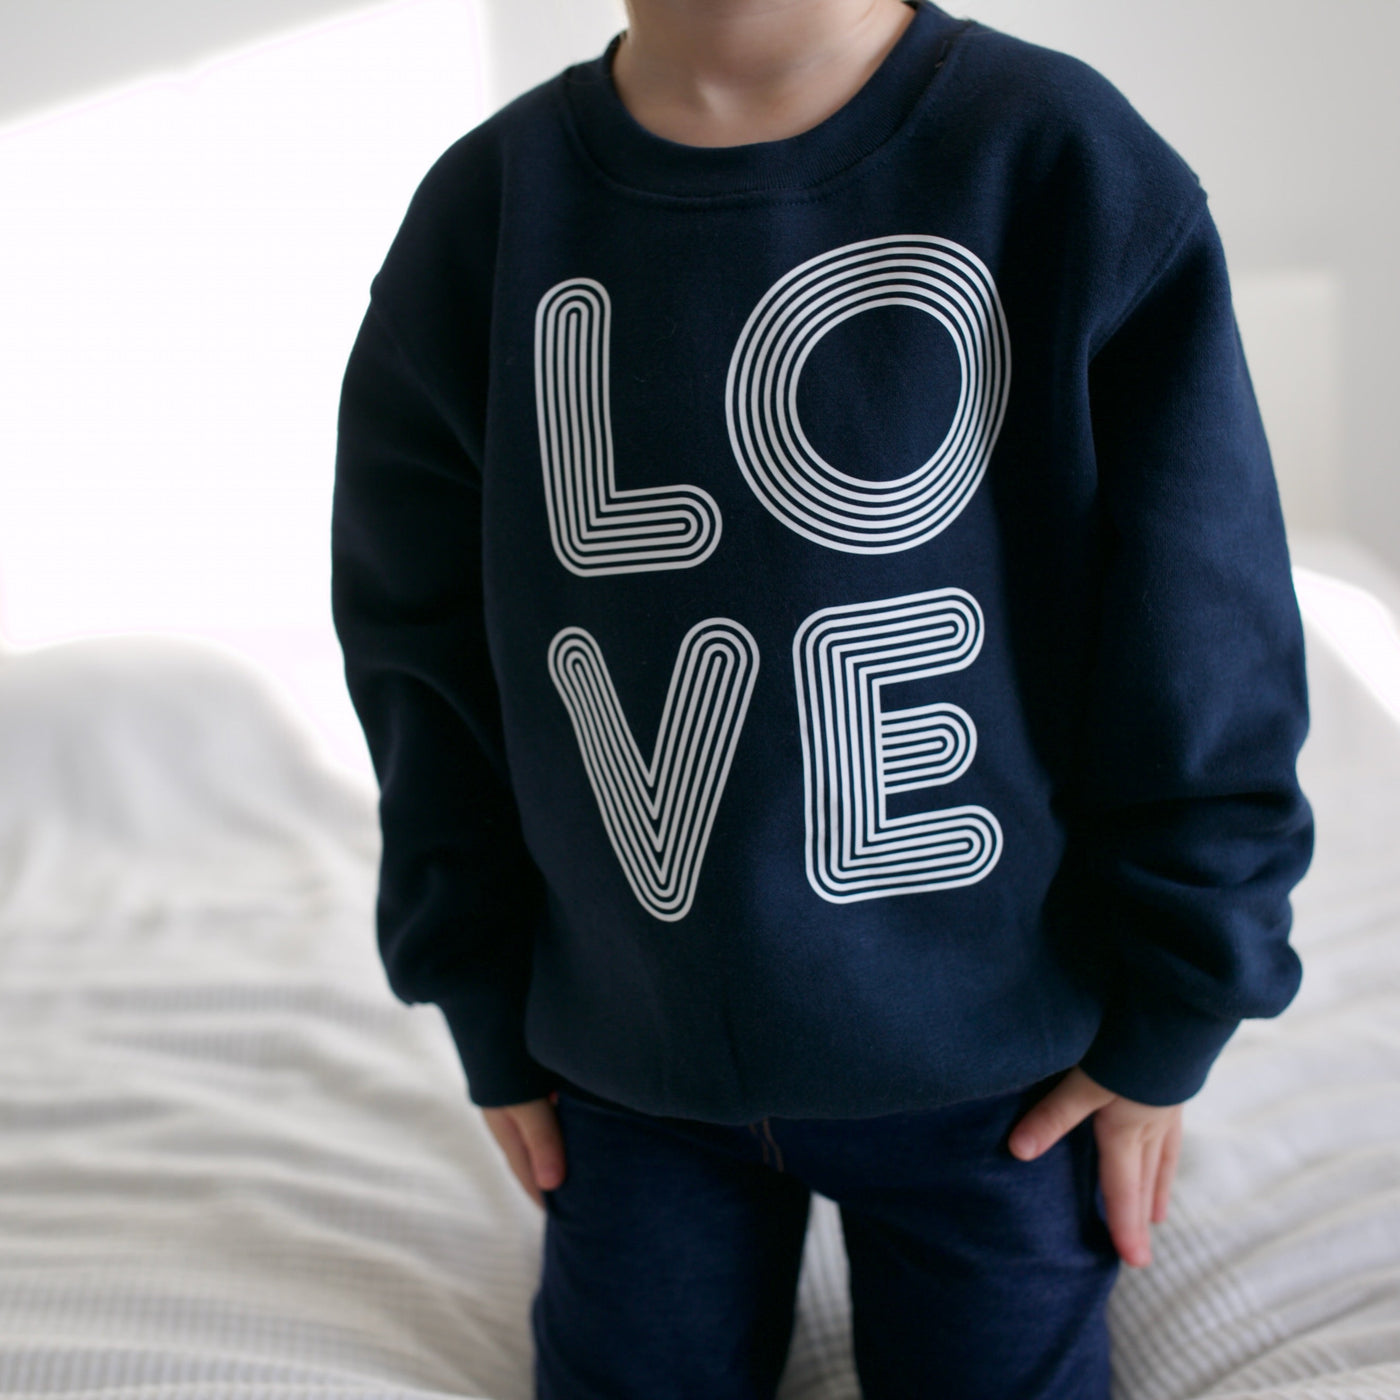 Adult & Child Navy Love Sweater-Jumpers (Child & Adult)-Fred & Noah-Yes Bebe